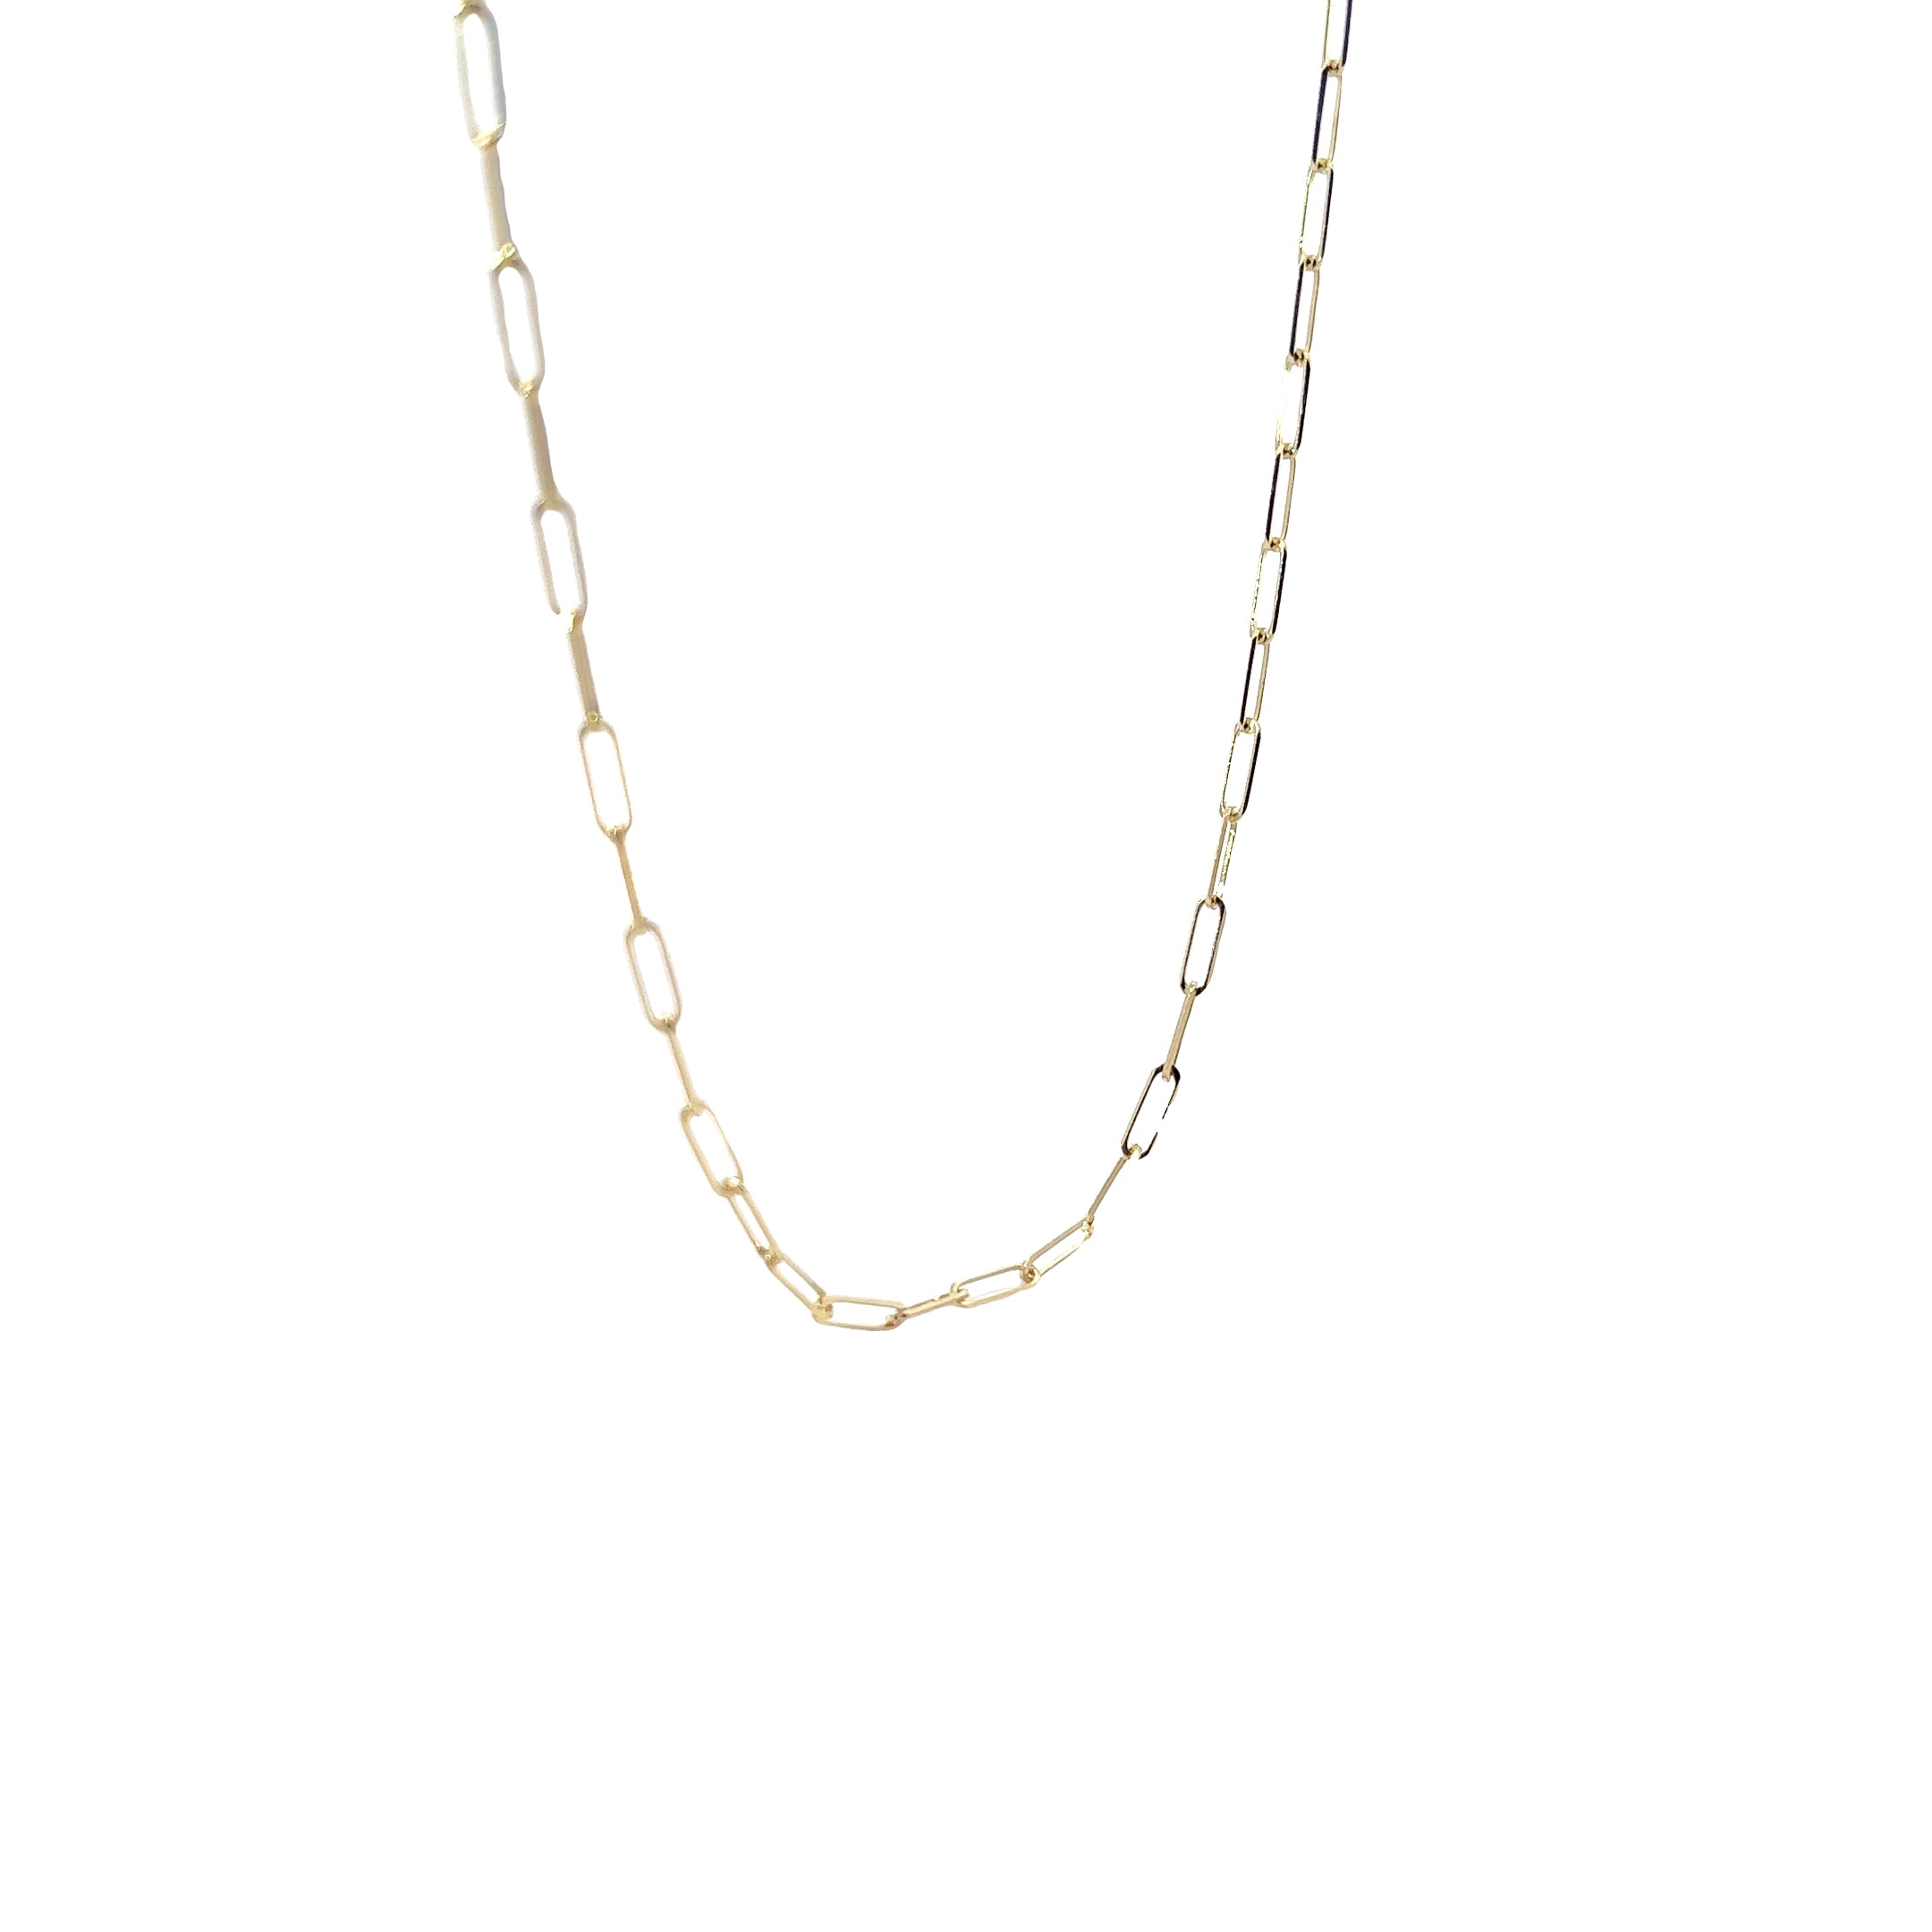 14K YELLOW GOLD PAPERCLIP CHAIN 2 1/2MM 16 INCH